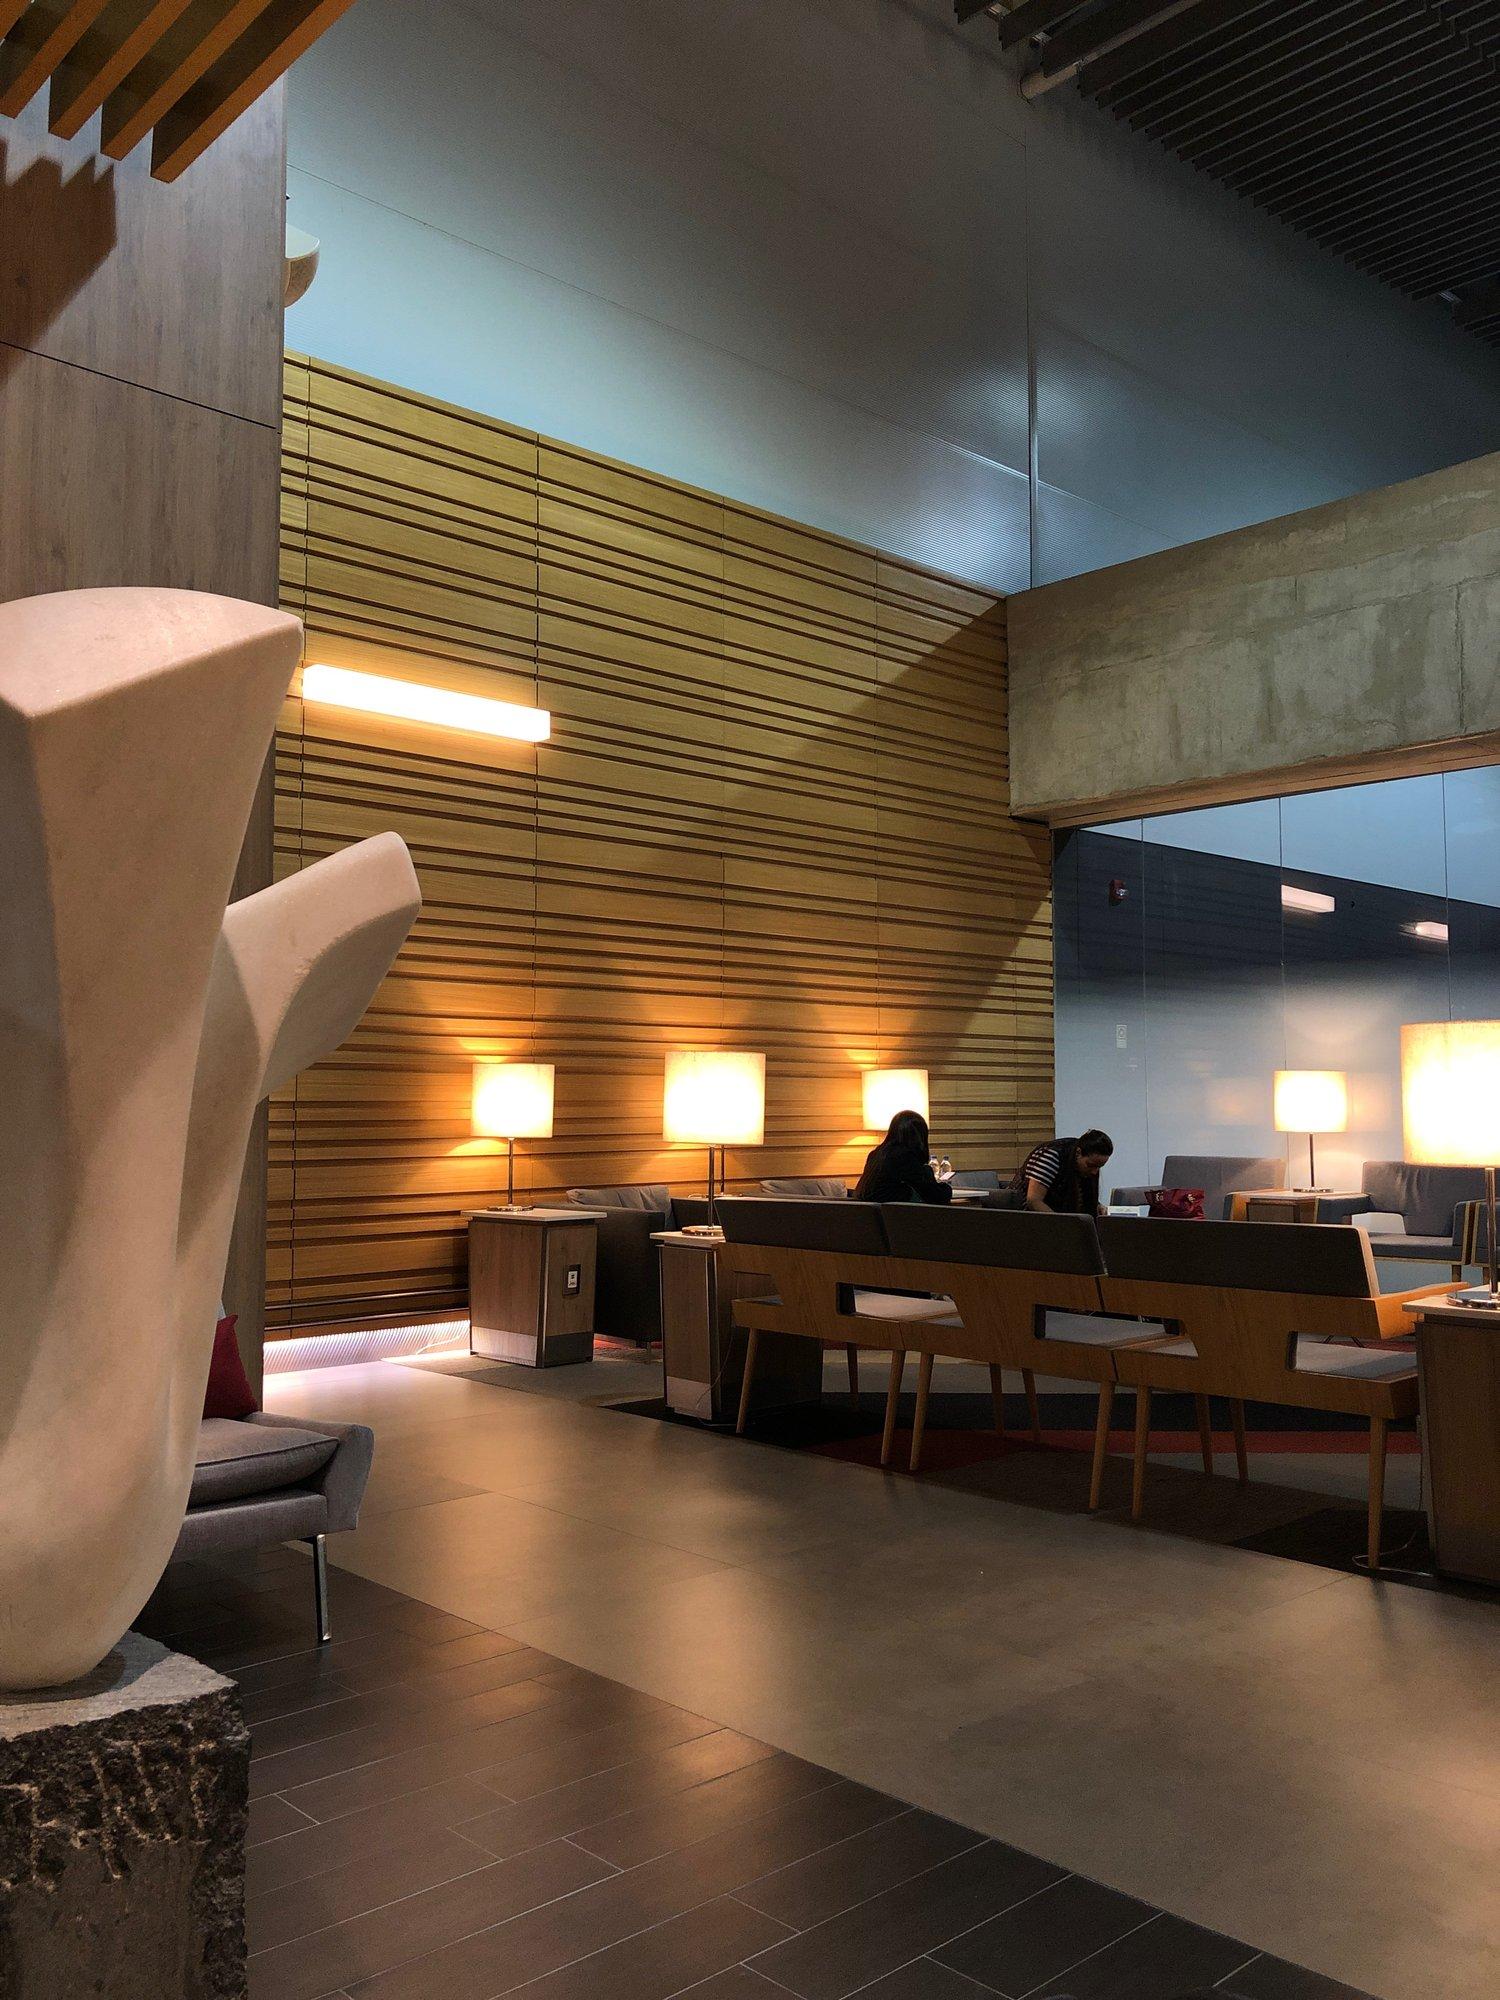 American Airlines Admirals Club image 7 of 30